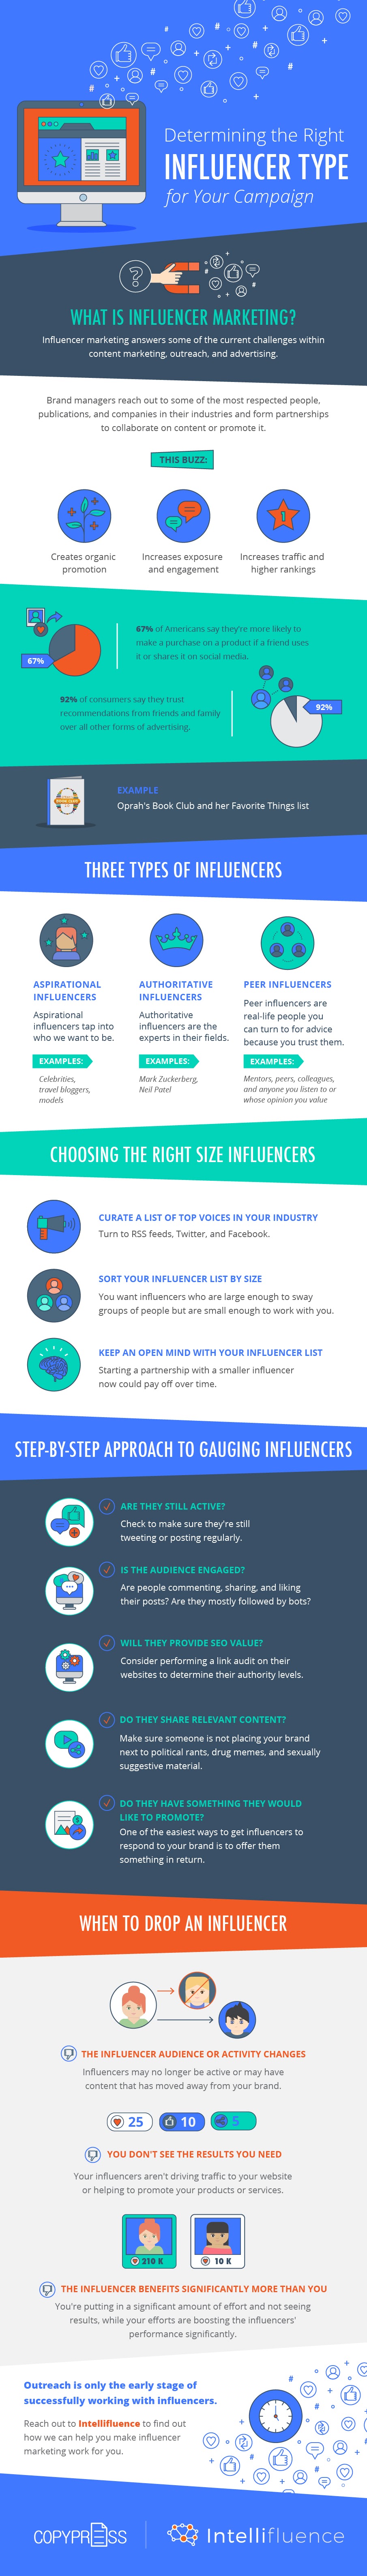 Determining the Right Influencer Type for your Campaign #infographic